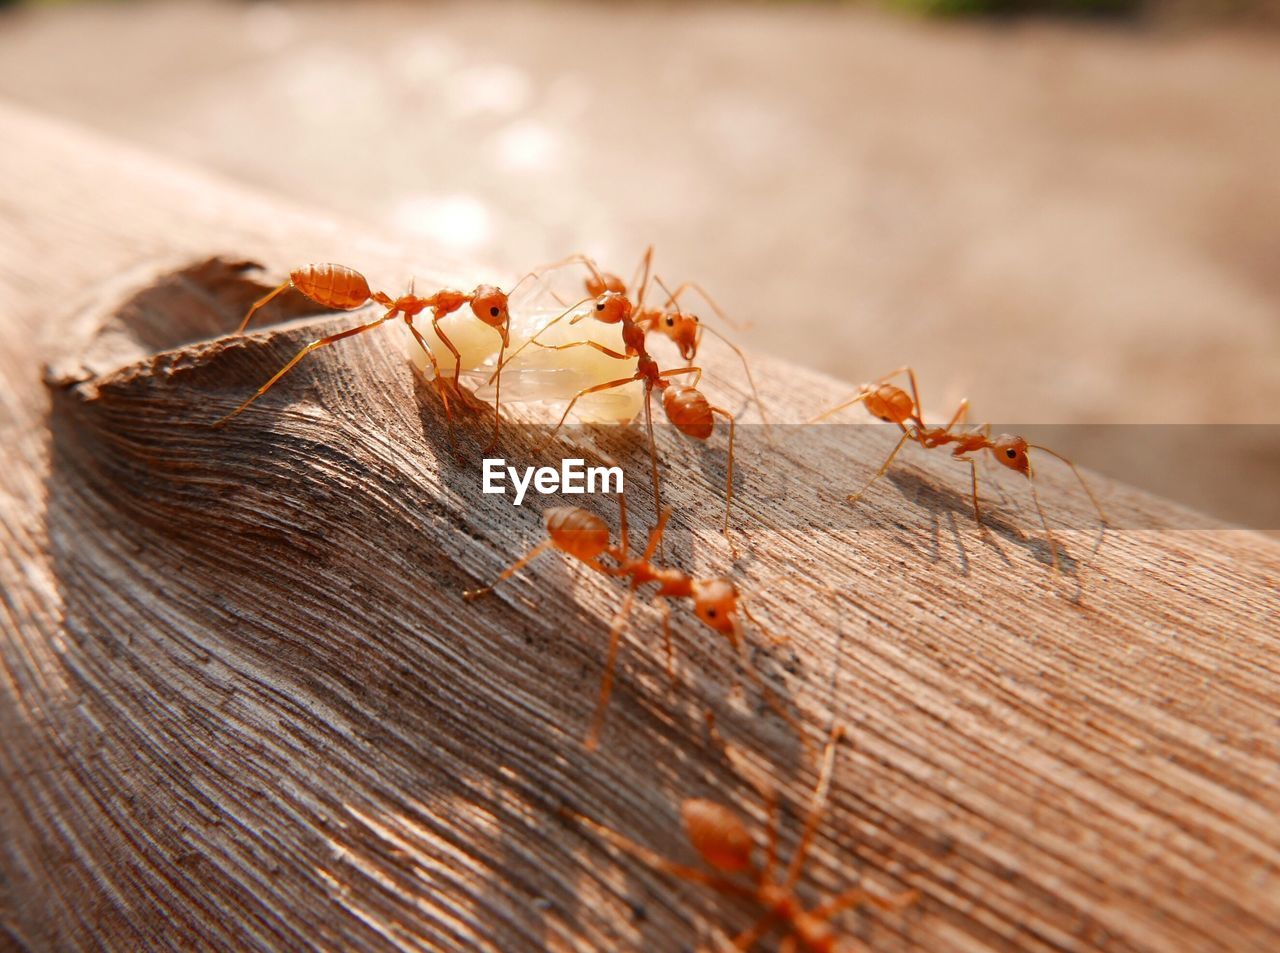 Close-up of ants on log